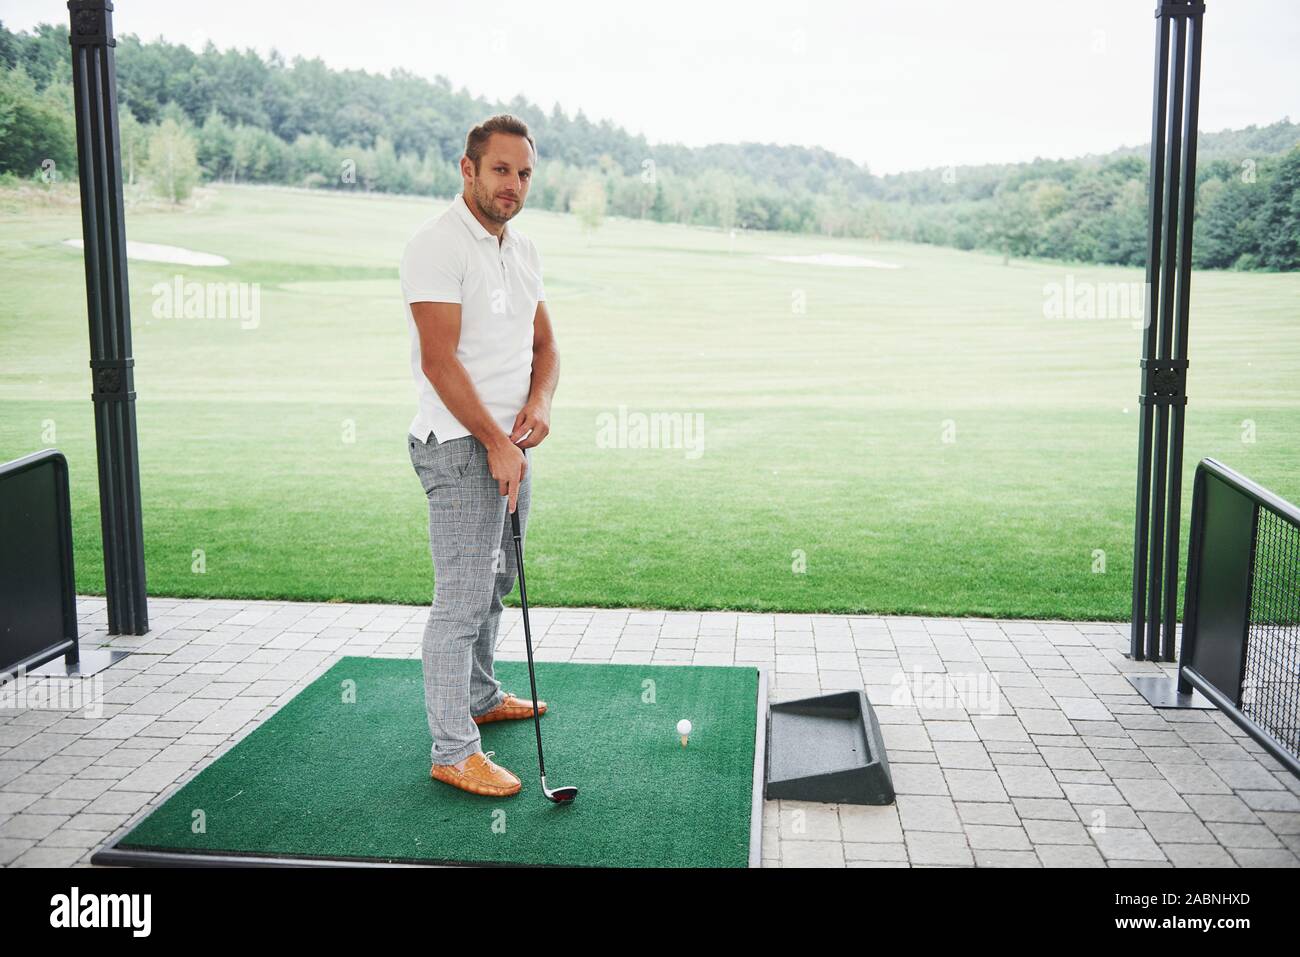 Pro golf player aiming shot with club on course. Male golfer on putting green about to take the shot Stock Photo